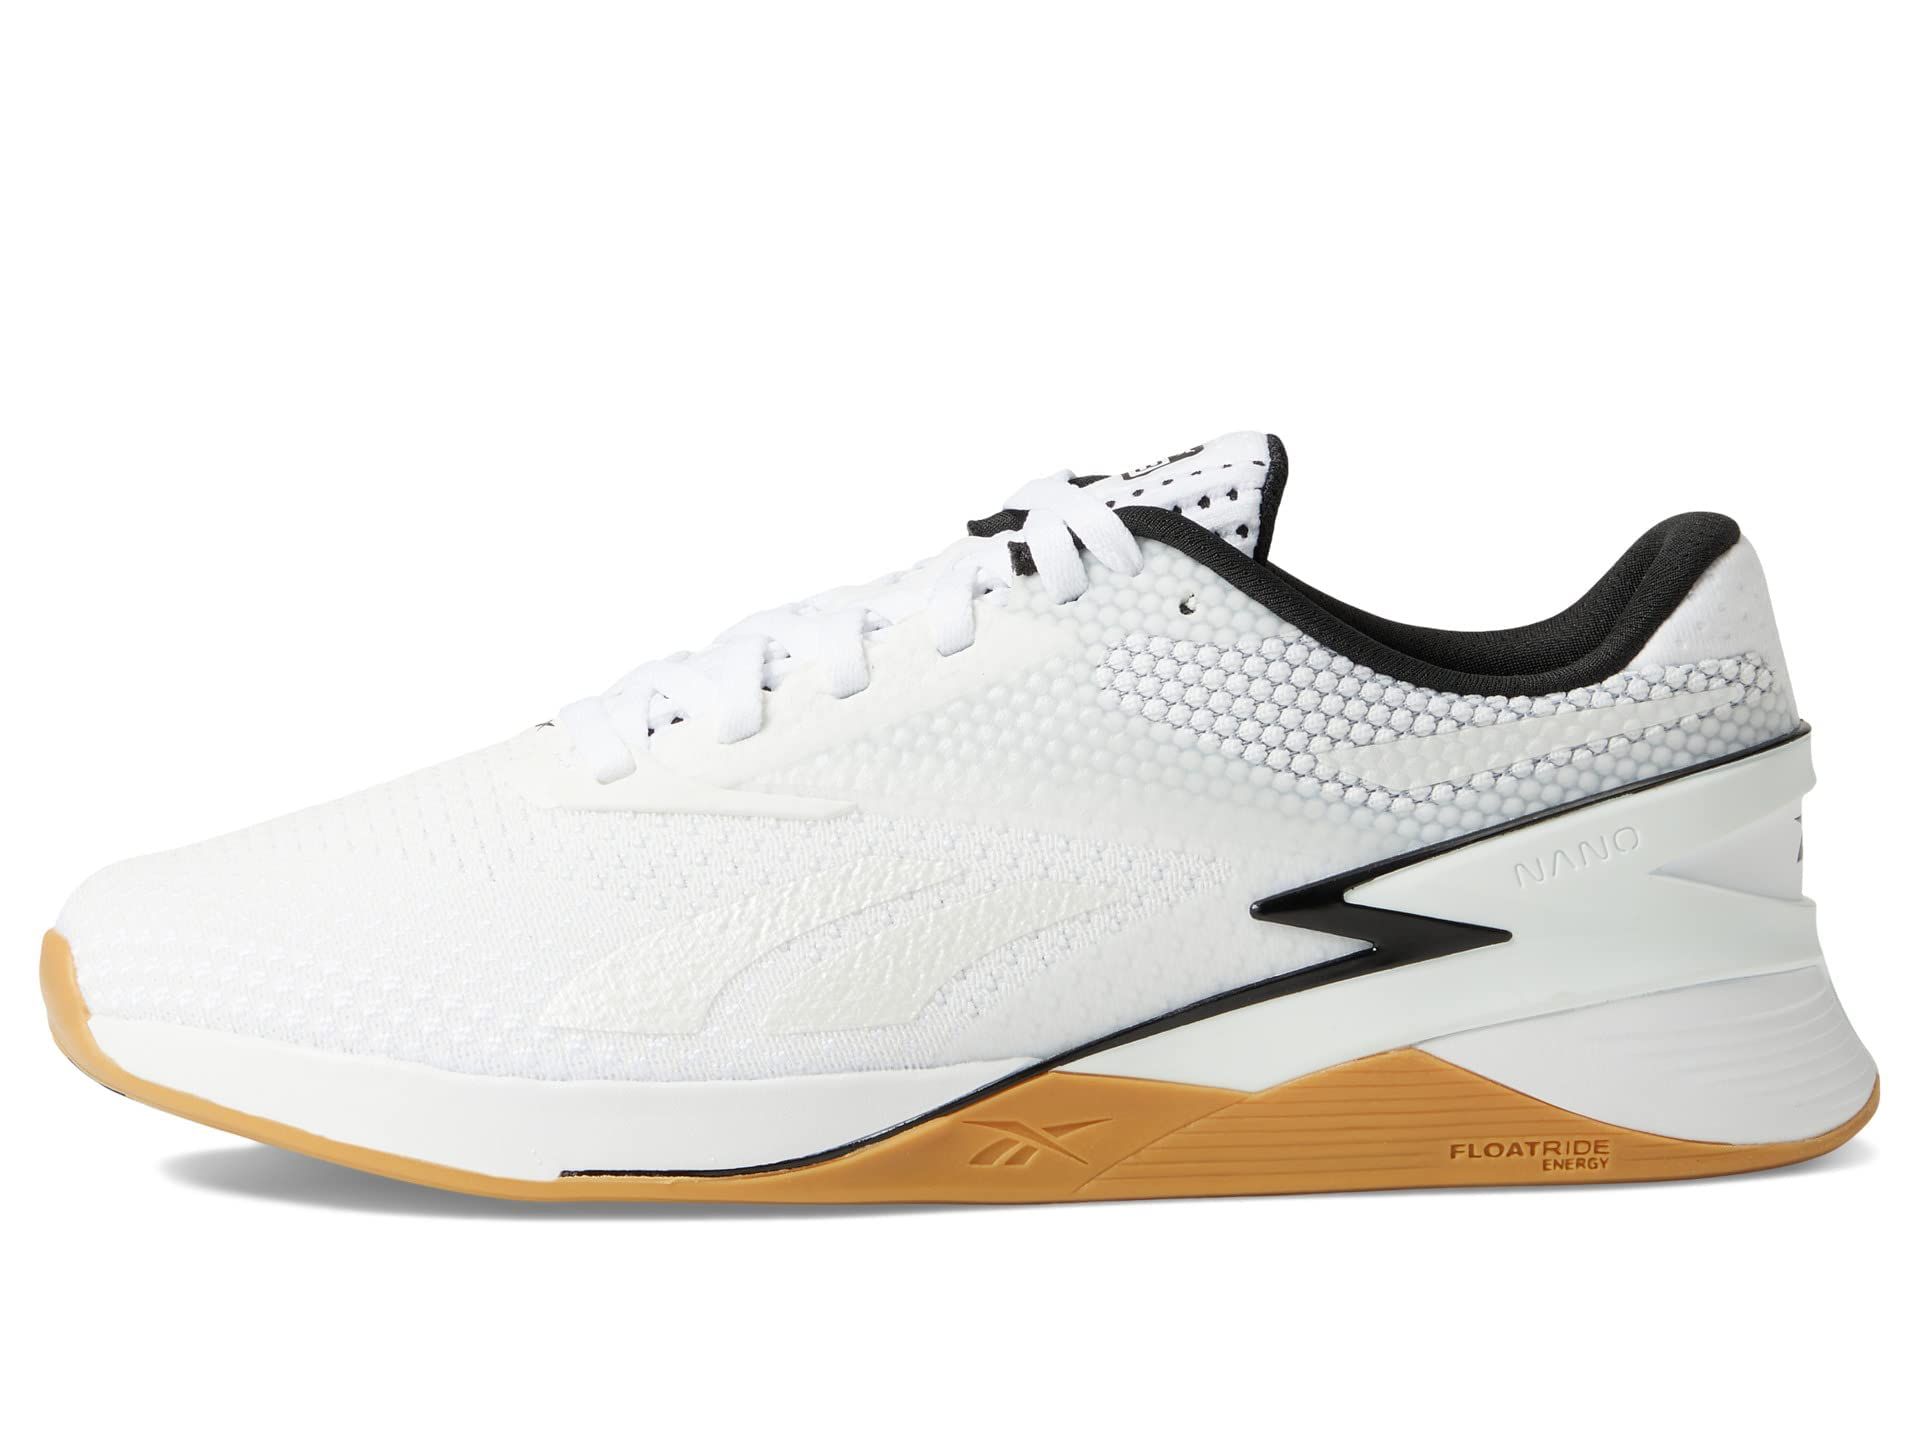 6 Best Reebok sneakers for men to have this season